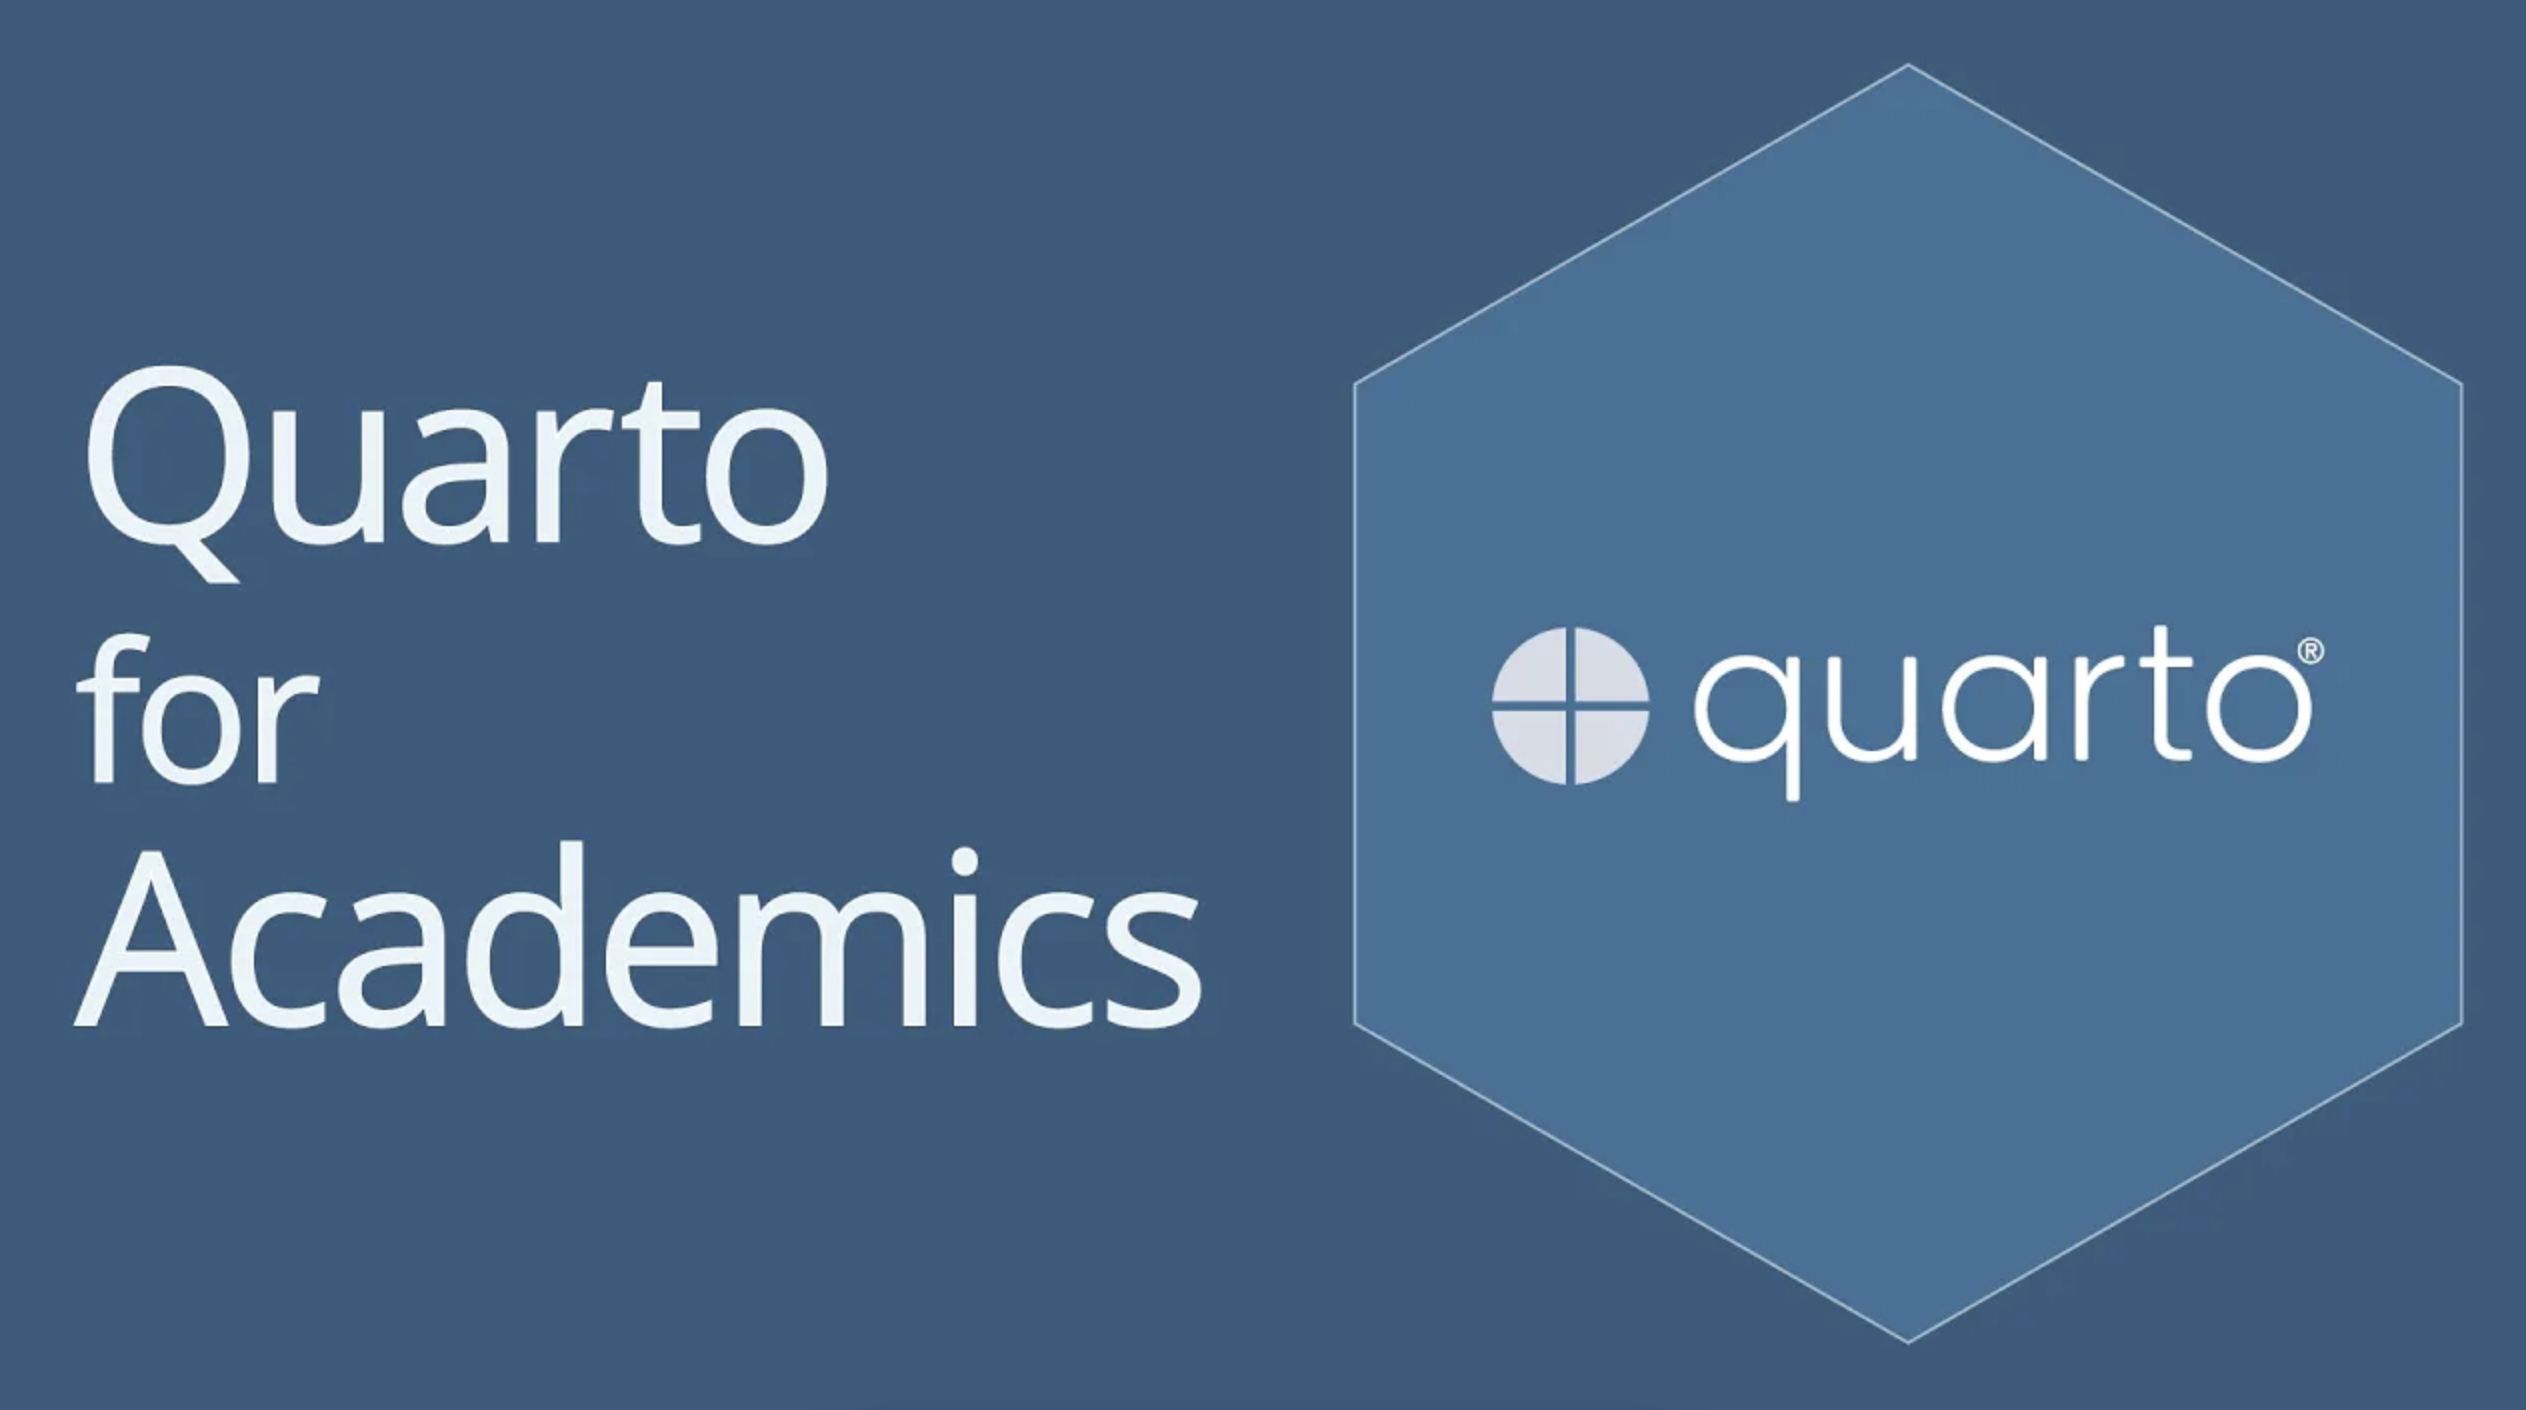 Quarto logo on a blue background and the title of the video - Quarto for Academics